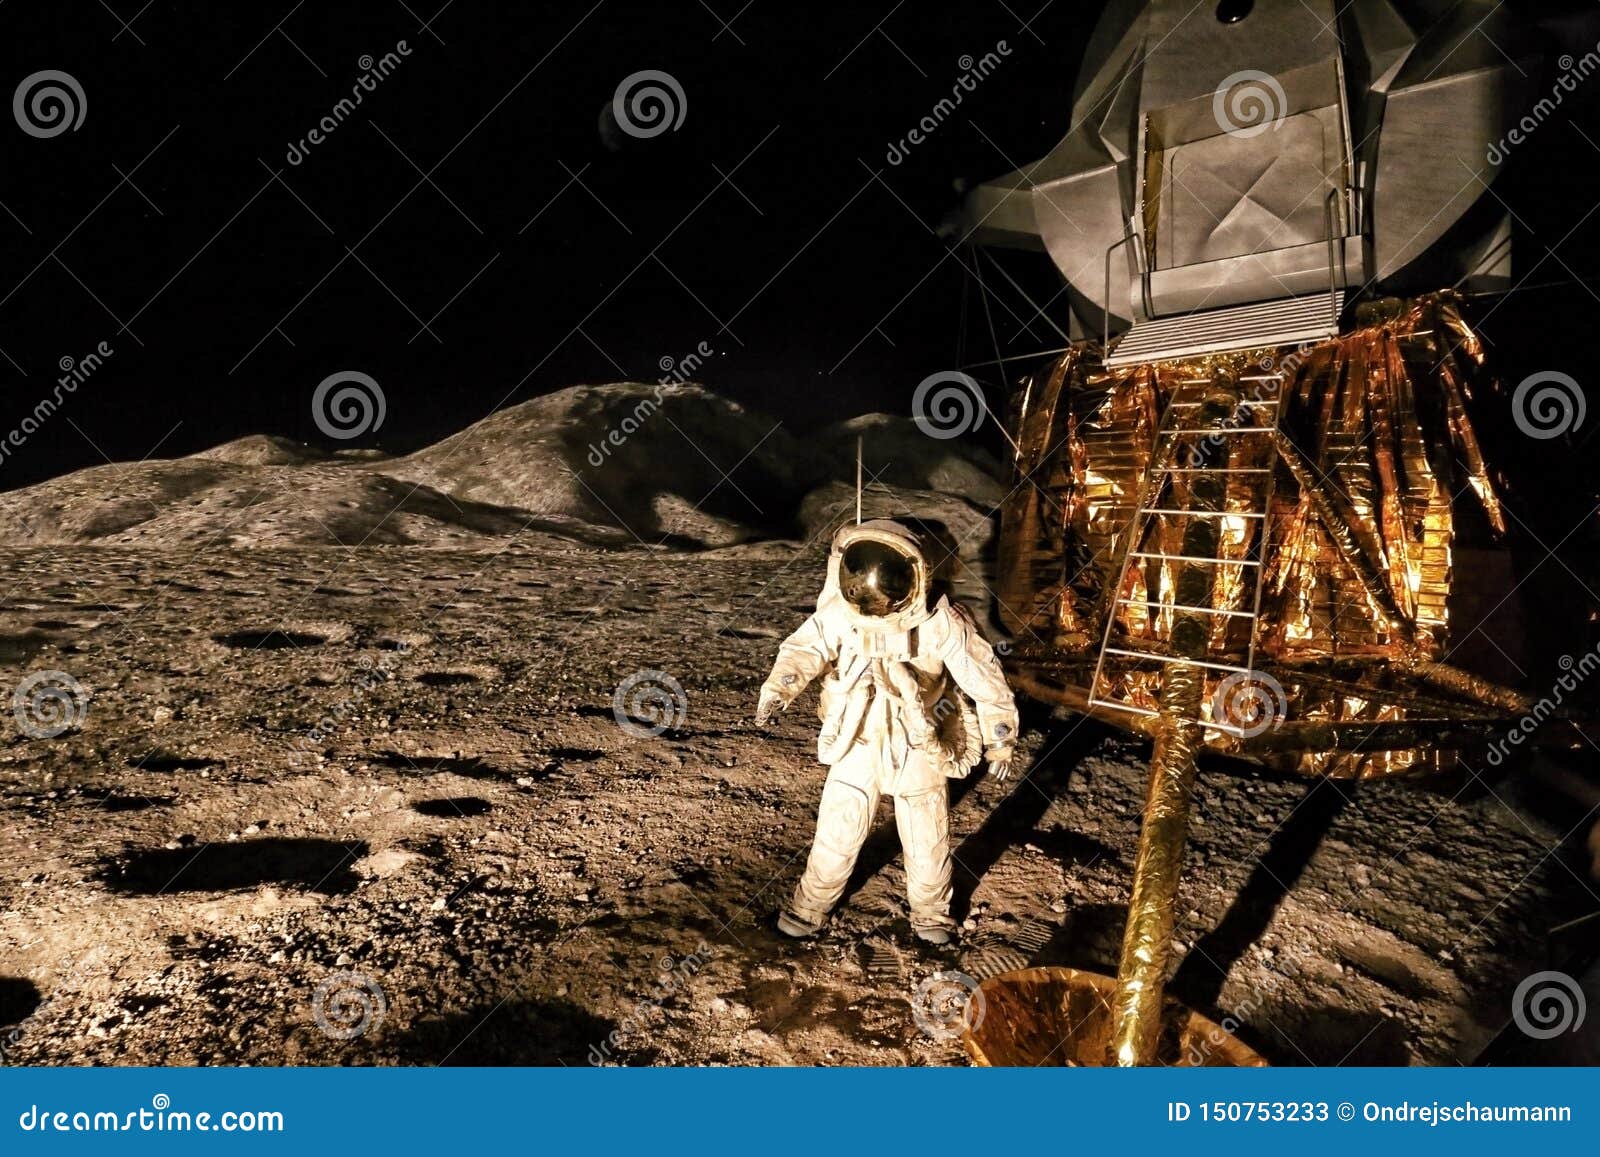 man on the moon pictures